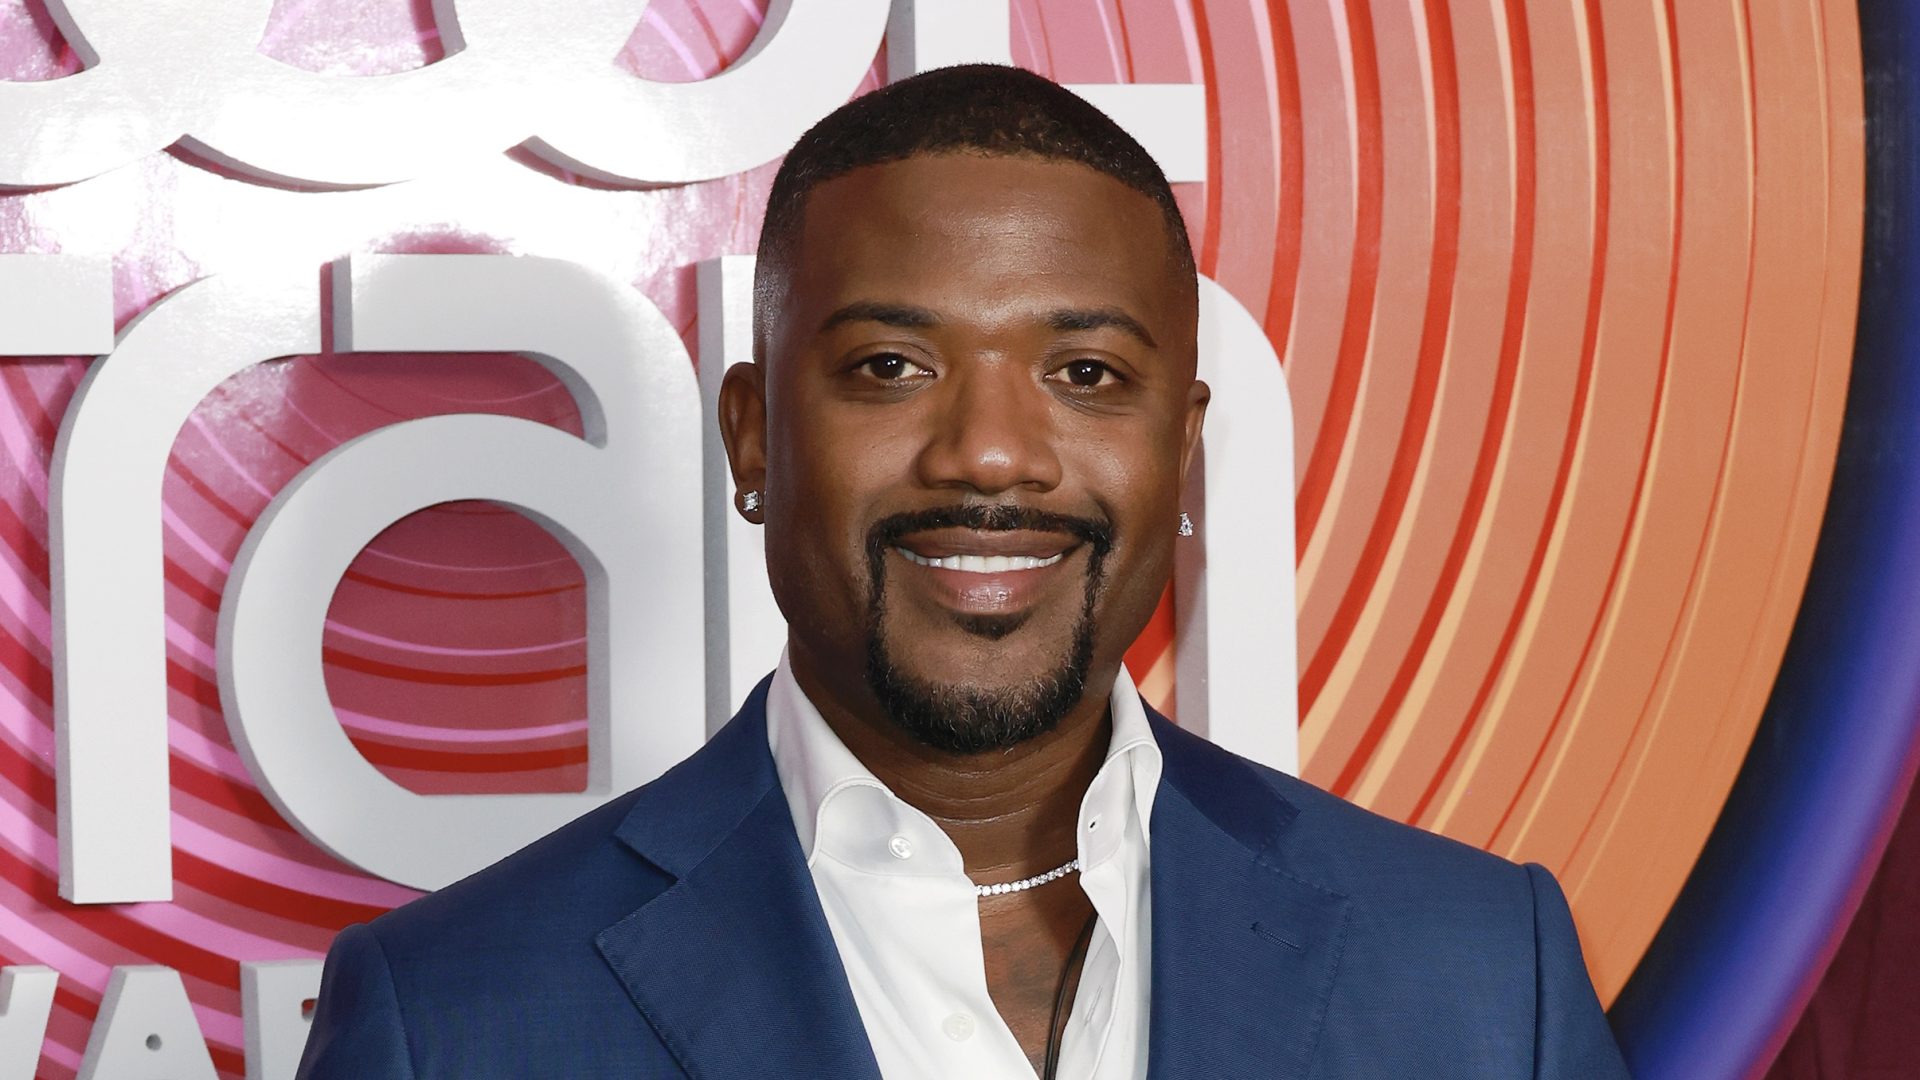 Ray J Addresses Public Concern After Revealing His New Face Tattoos (WATCH)